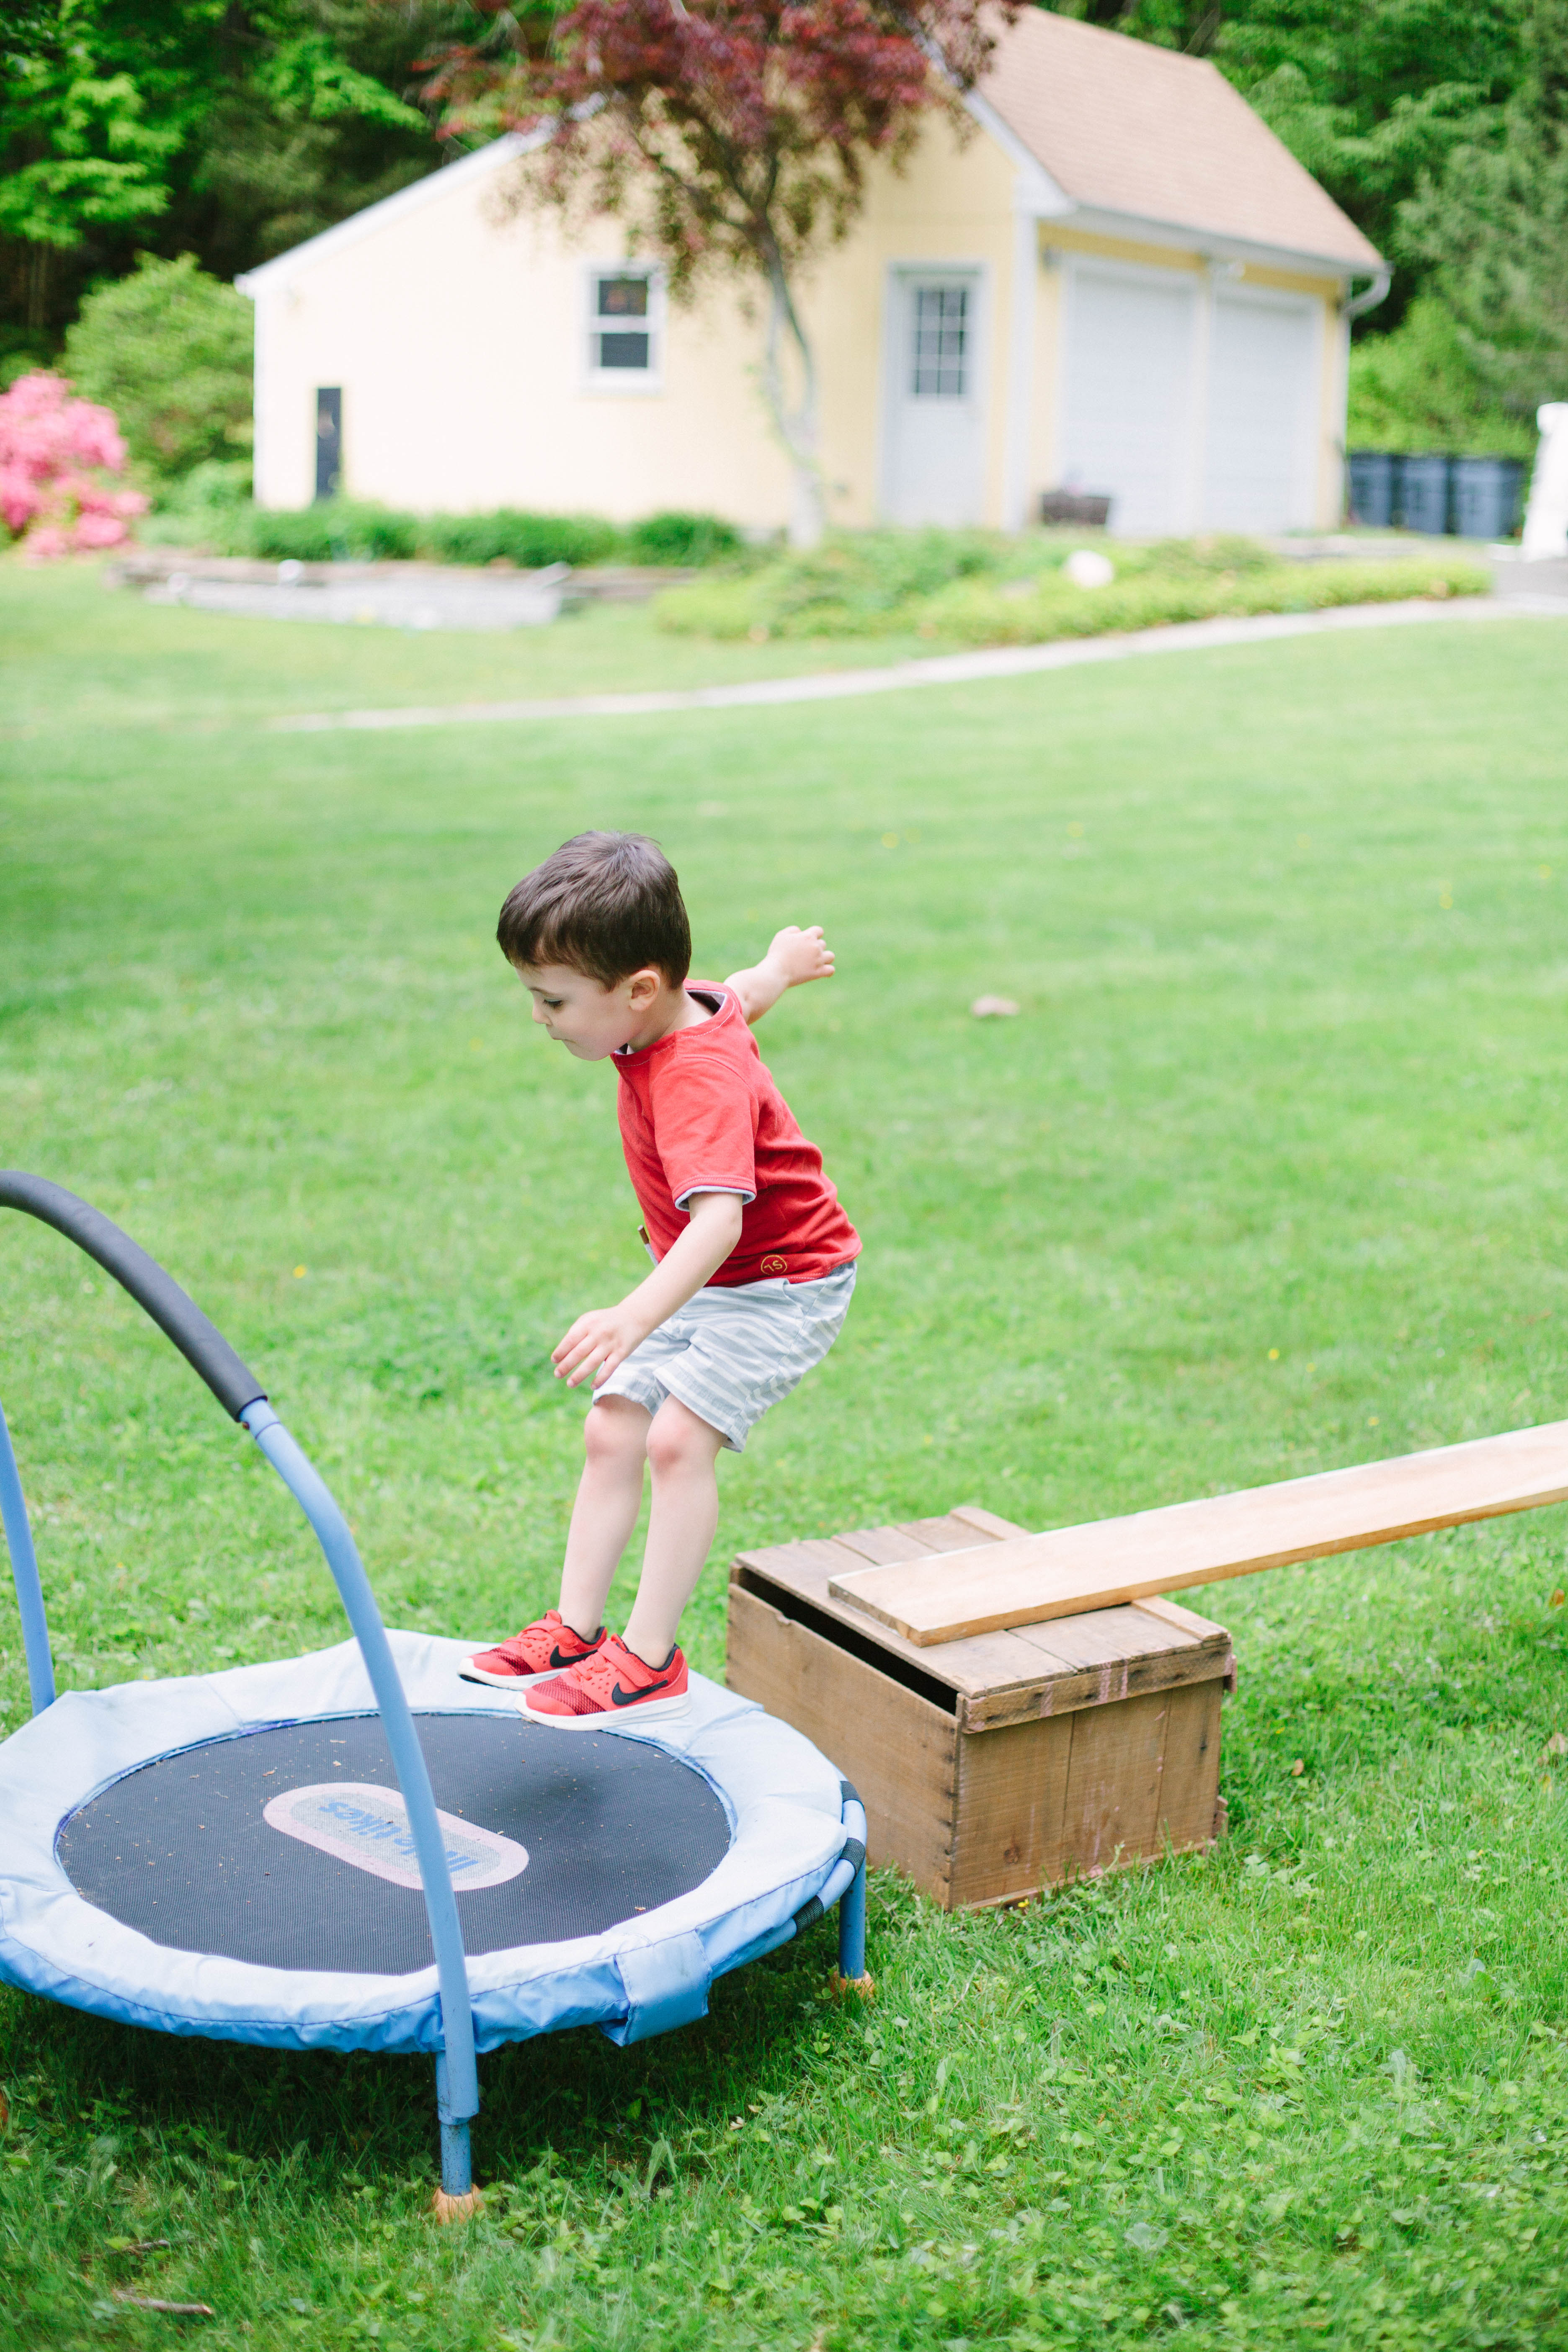 This Outdoor Toddler Obstacle Course is easy to create with items you may already have at home, and will provide hours of fun for your kids!